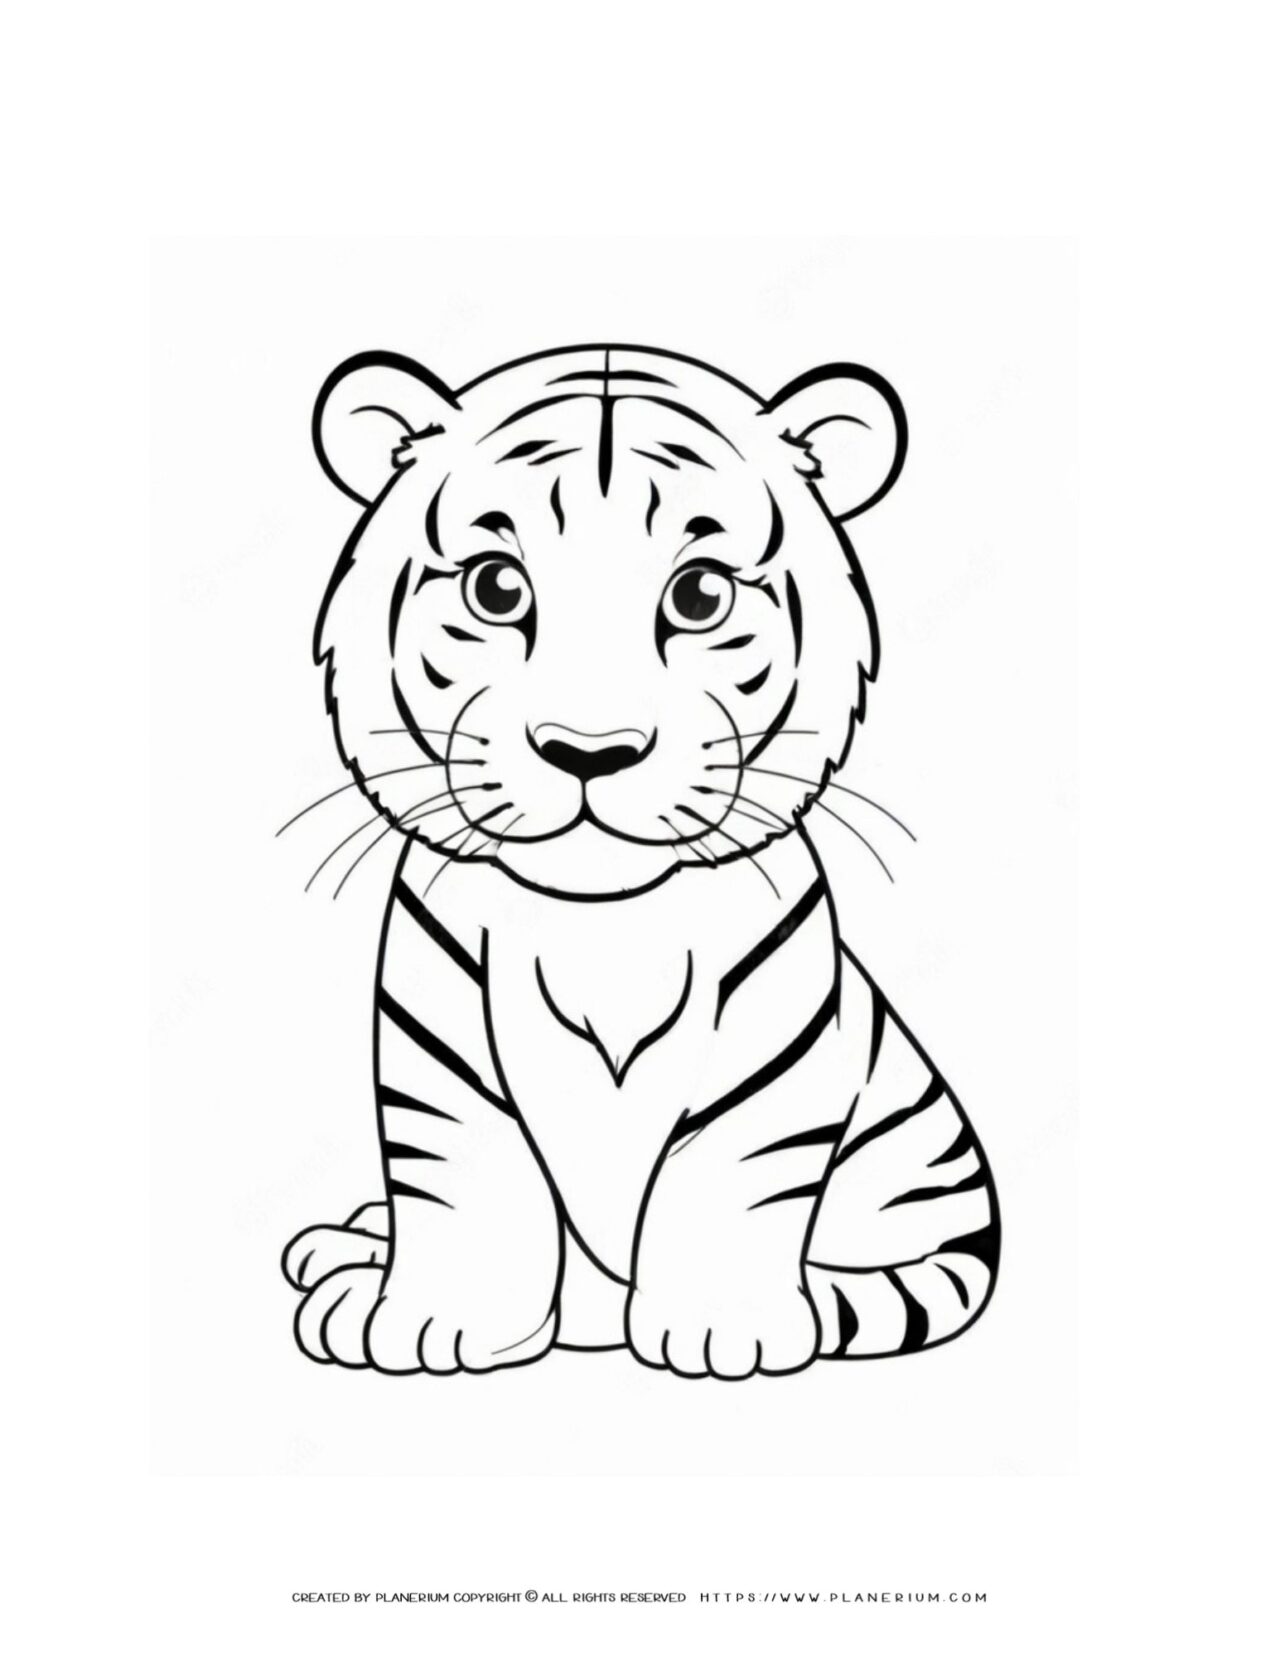 Cute-Baby-Tiger-Outline-Coloring-Page-for-Kids